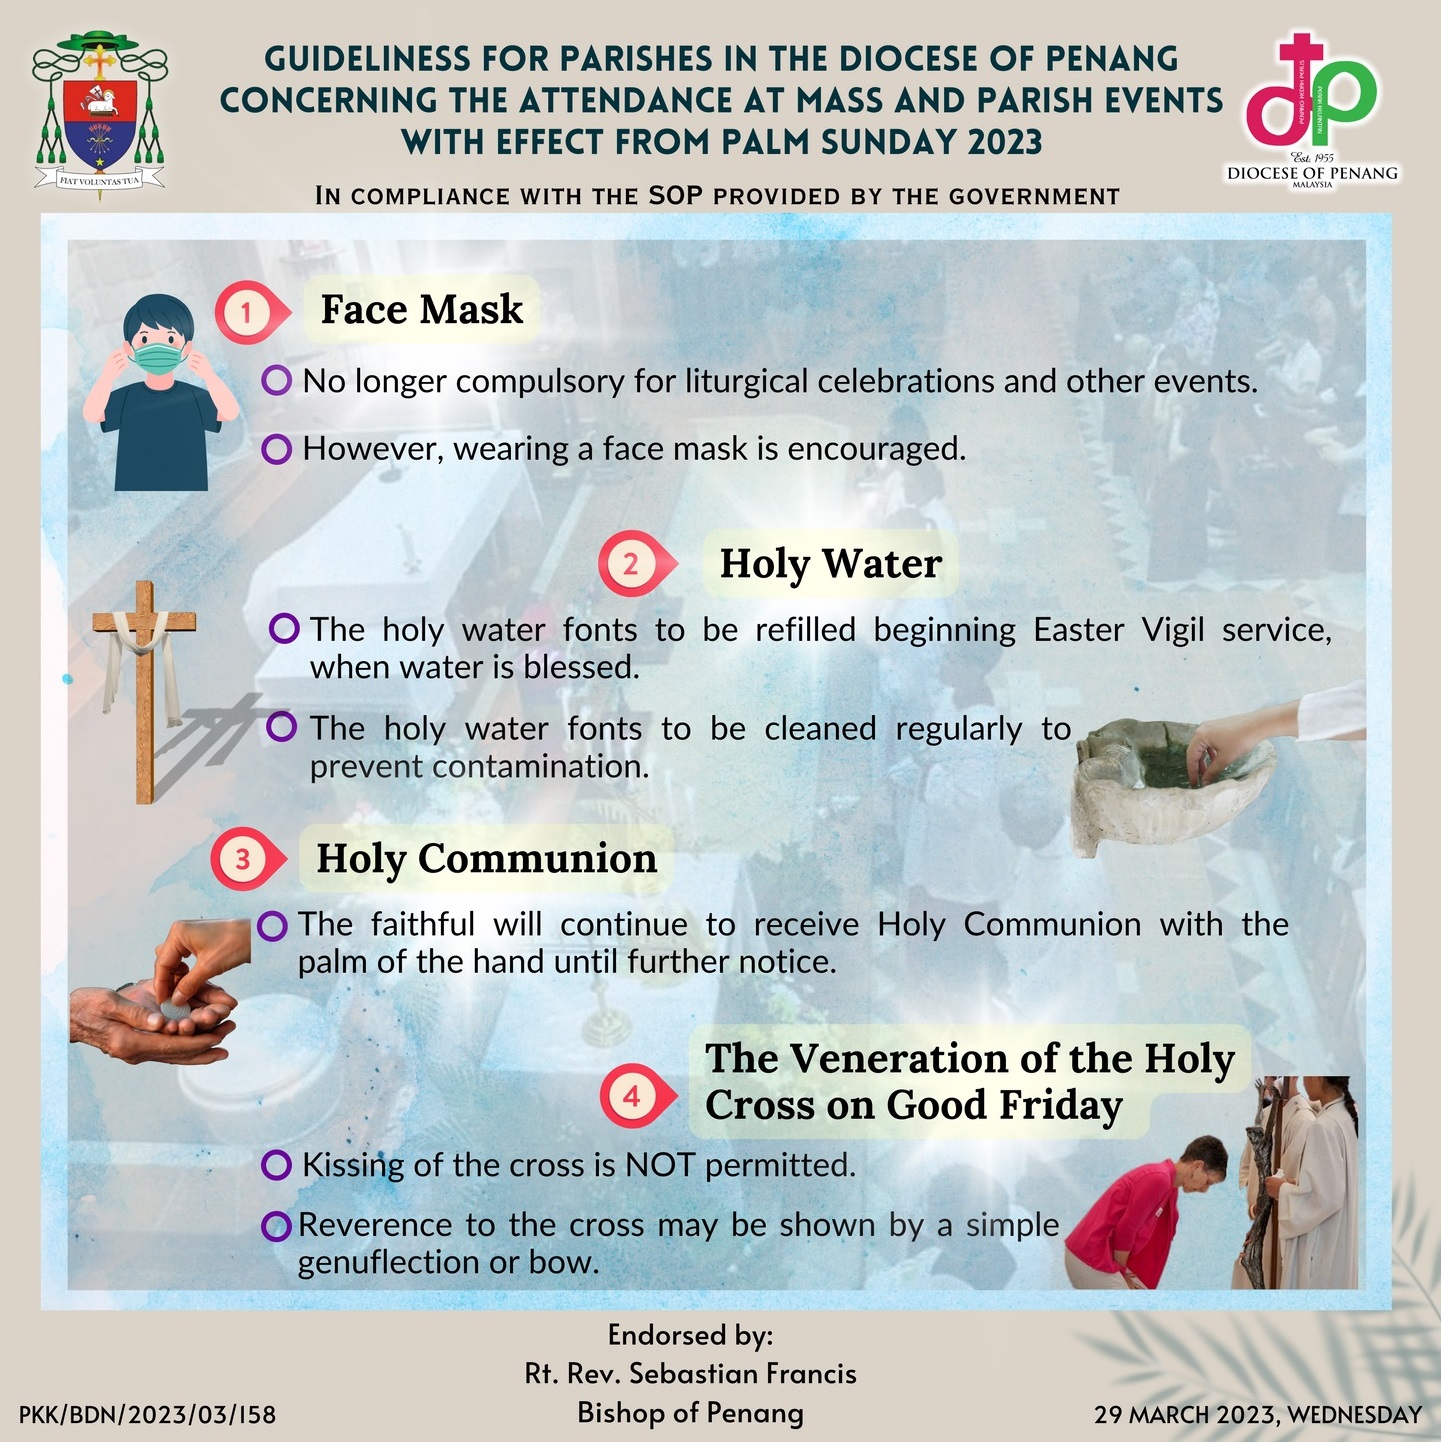 New guidelines concerning mass attendance from the Penang diocese dated 29th March 2023